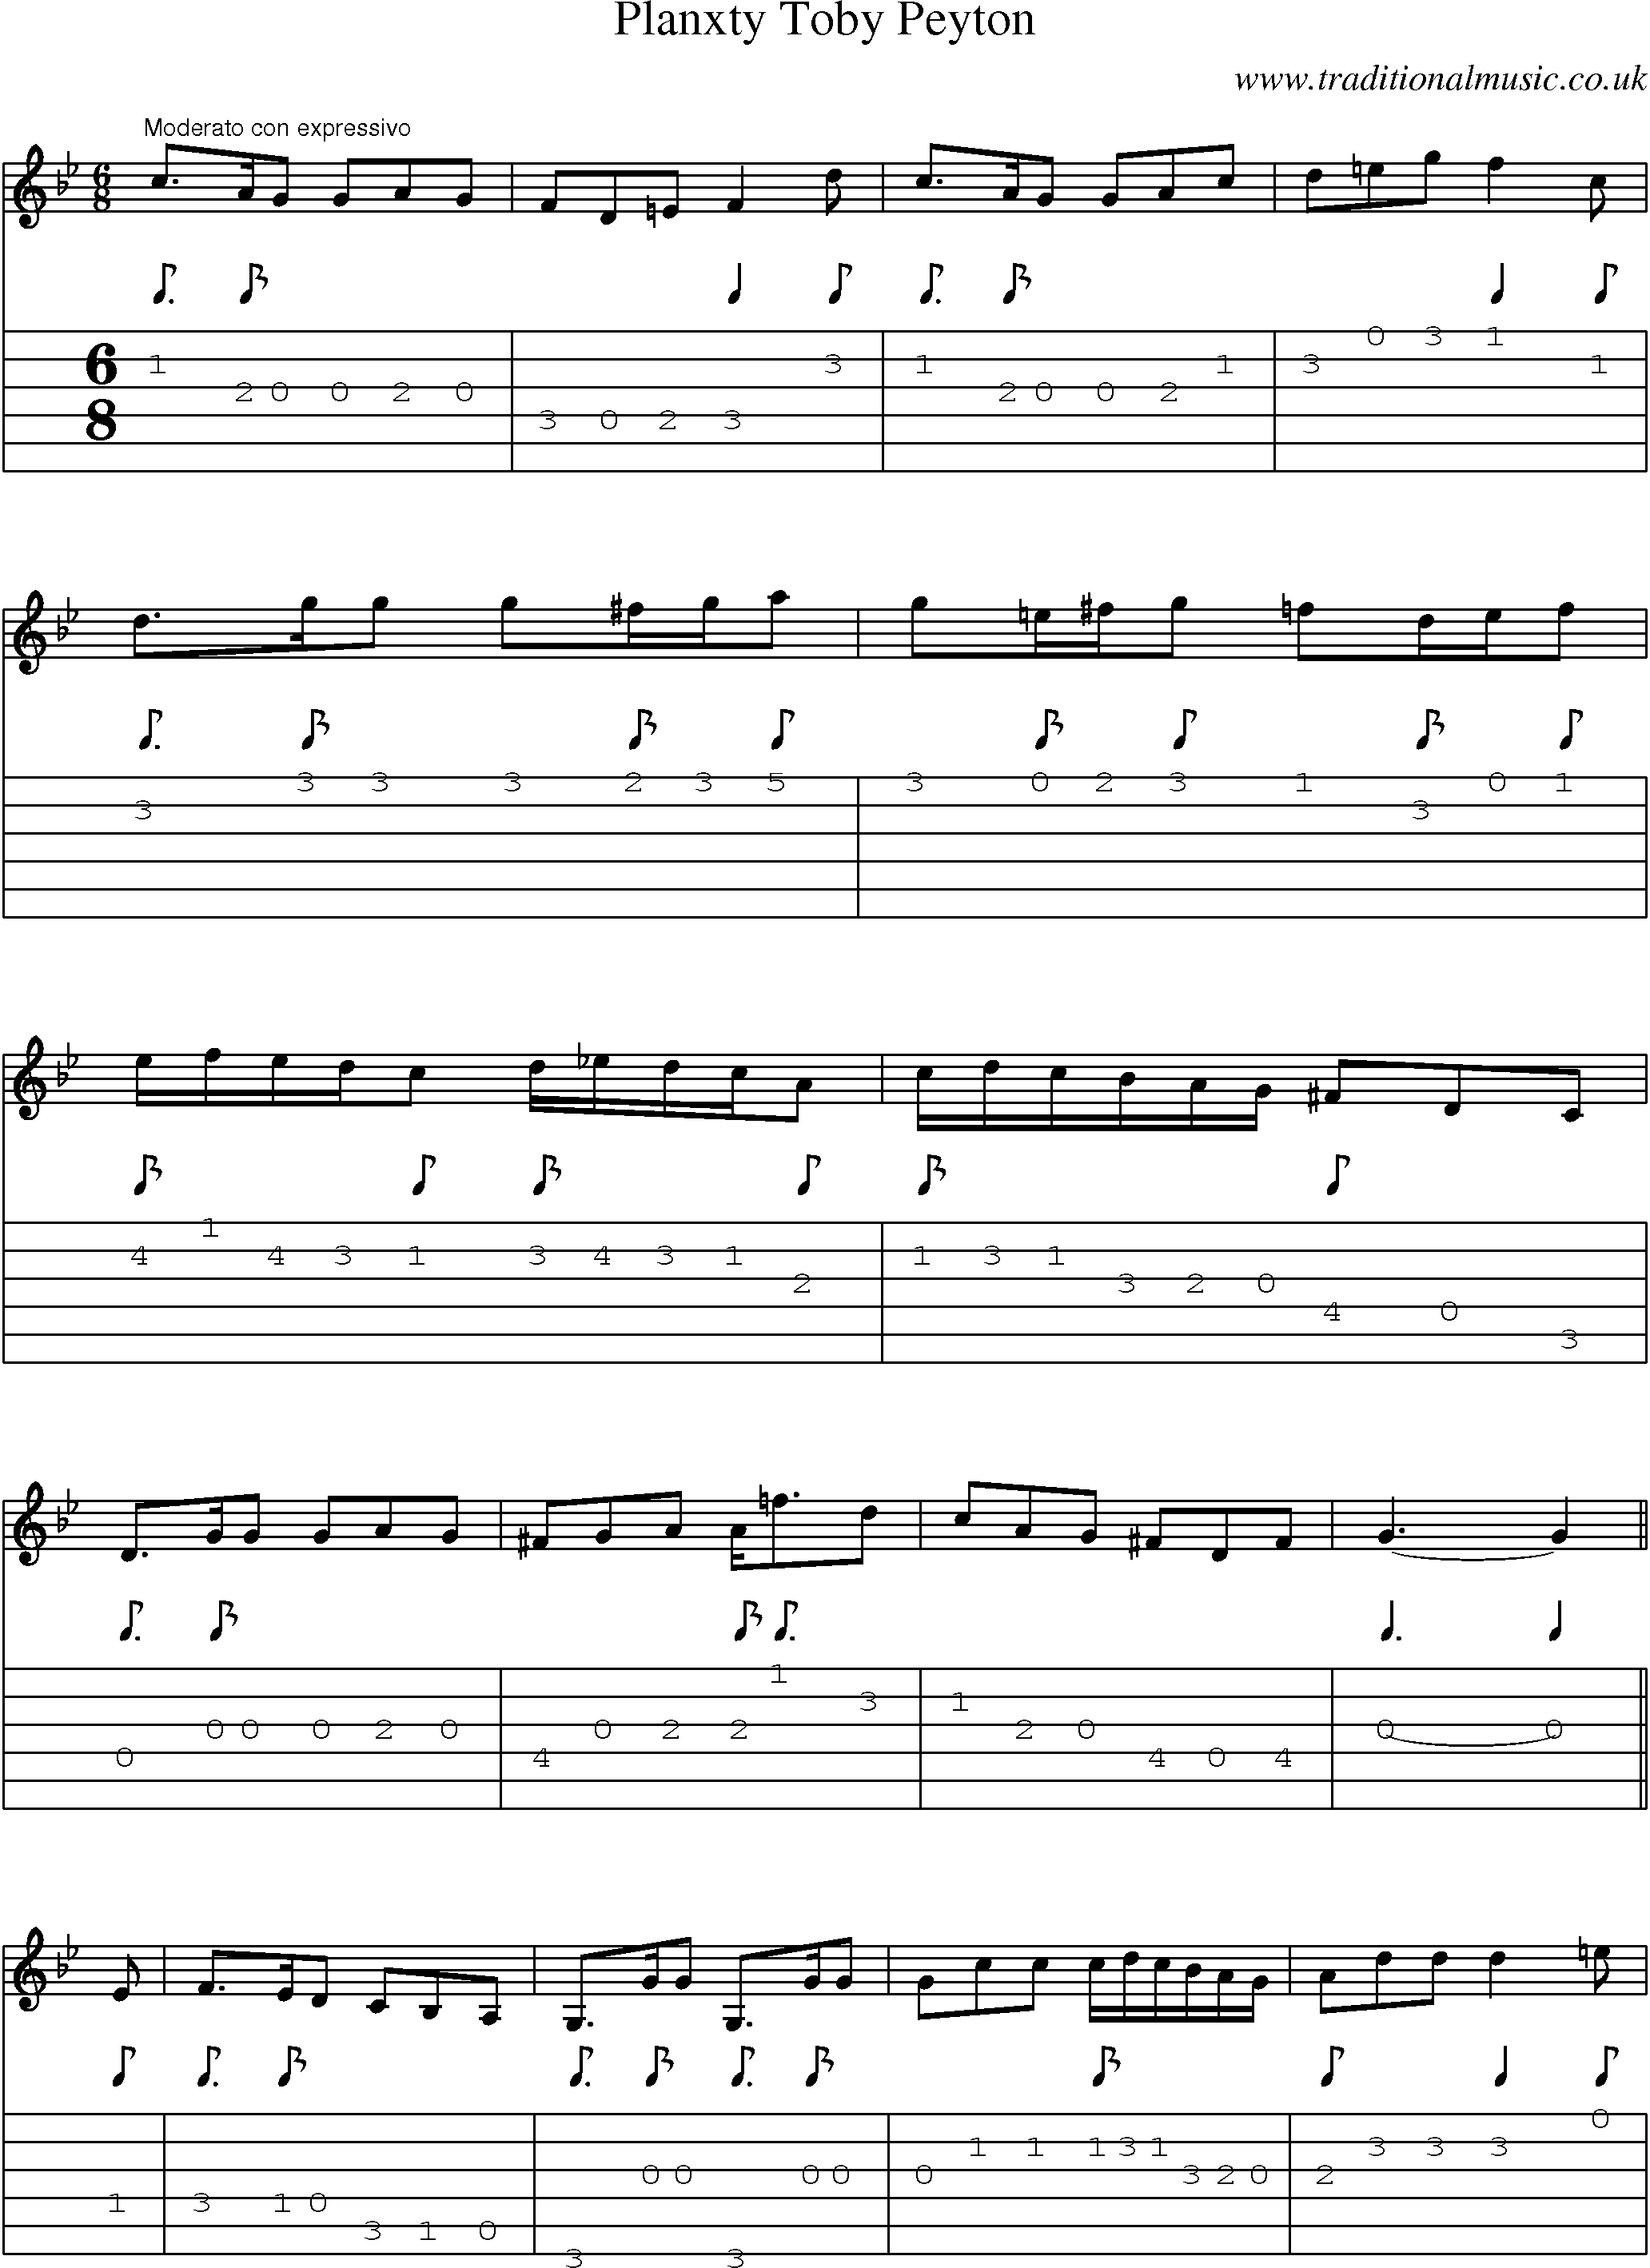 Music Score and Guitar Tabs for Planxty Toby Peyton